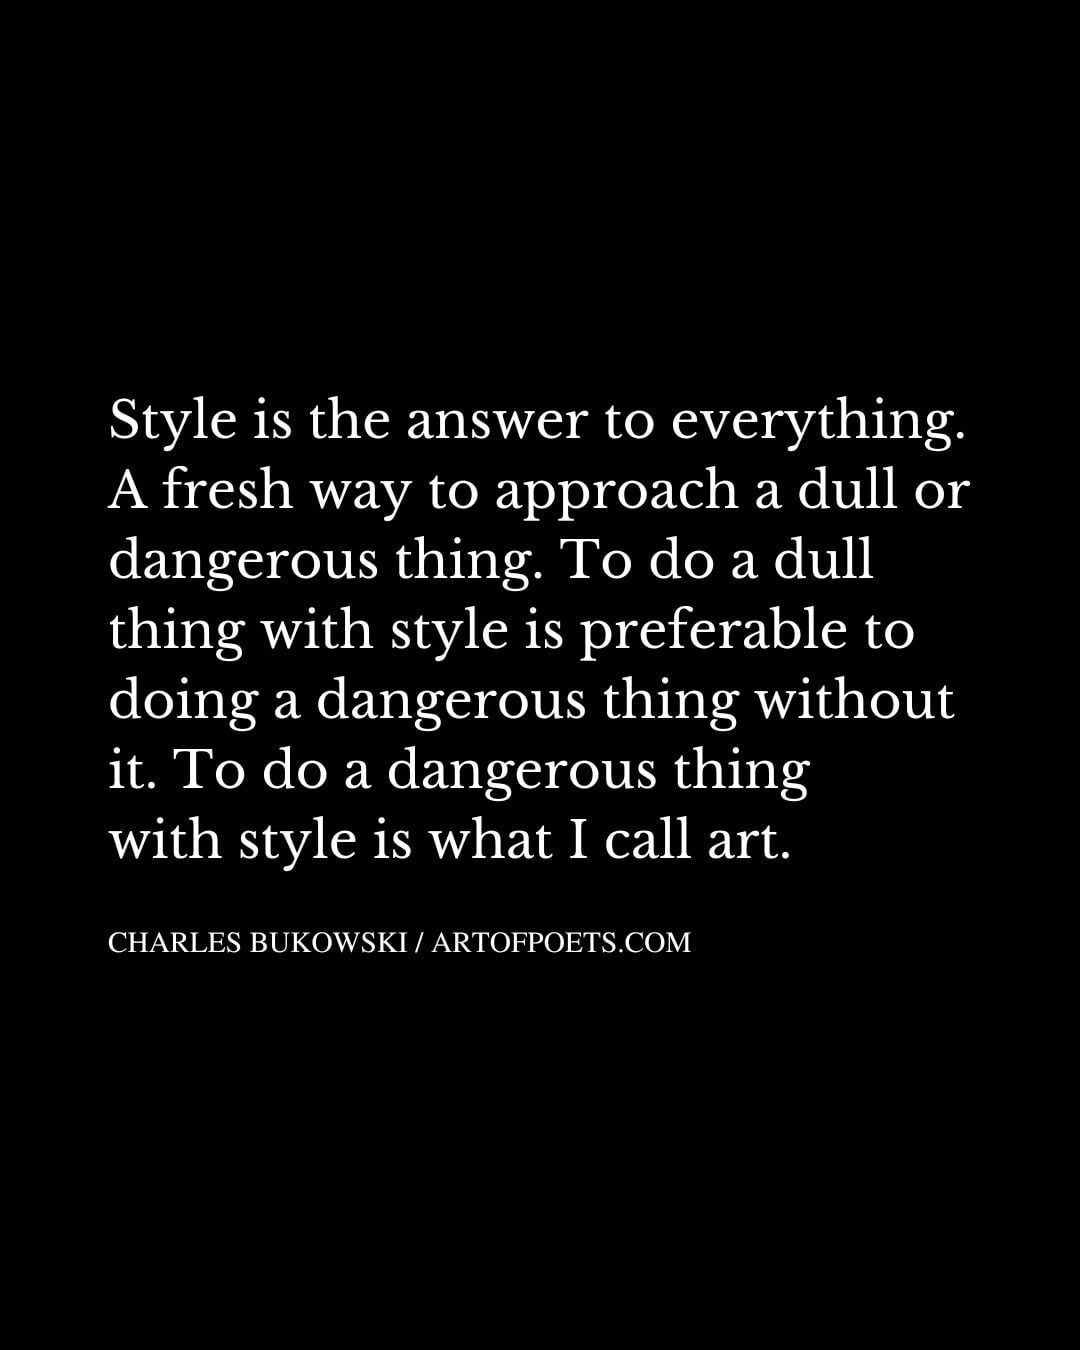 Style is the answer to everything. A fresh way to approach a dull or dangerous thing. To do a dull thing